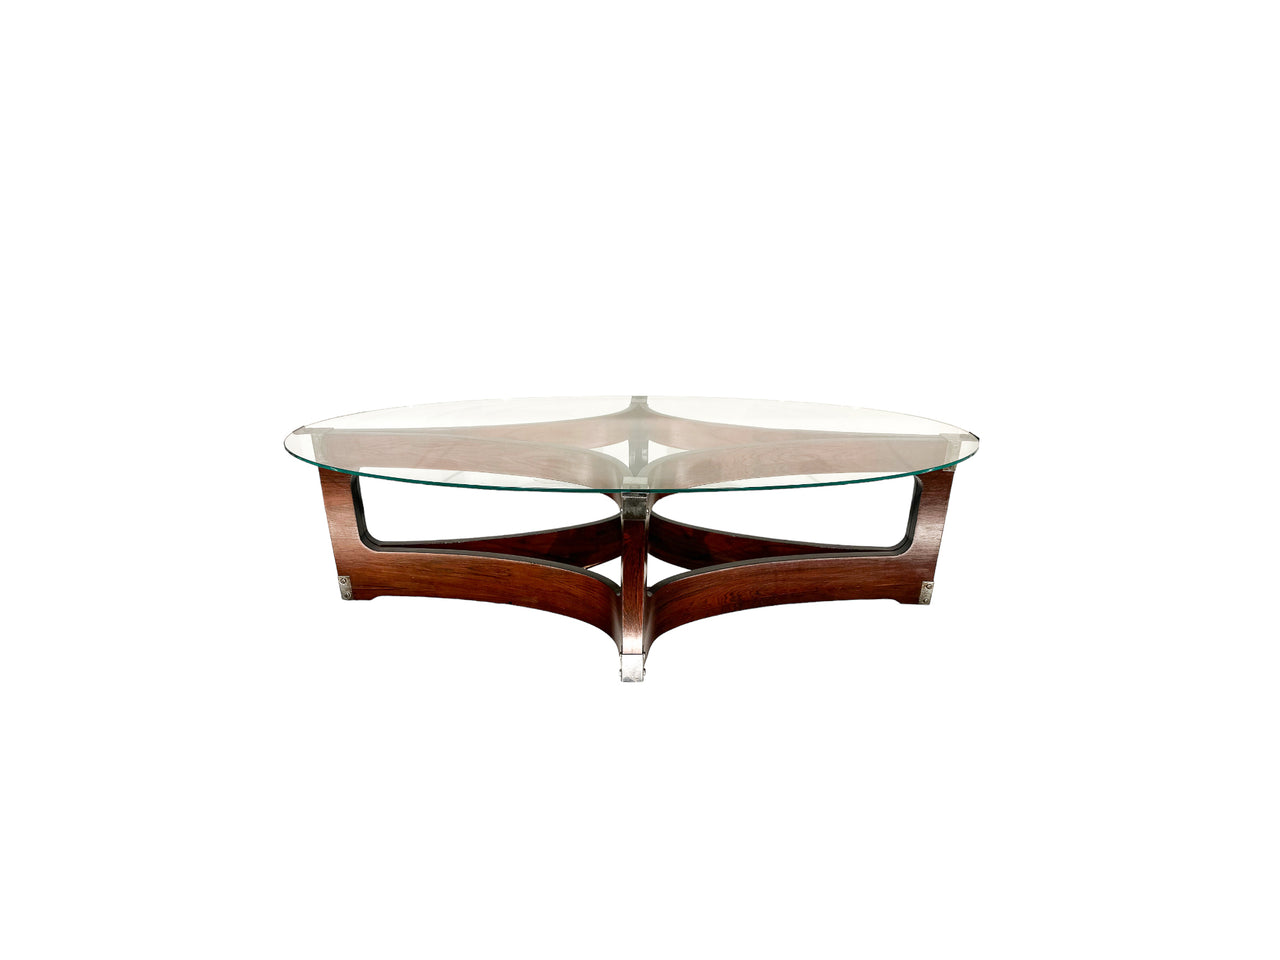 Coffee Table in Bent Wood & Glass by Novo Rumo, c. 1960s - Lot 427